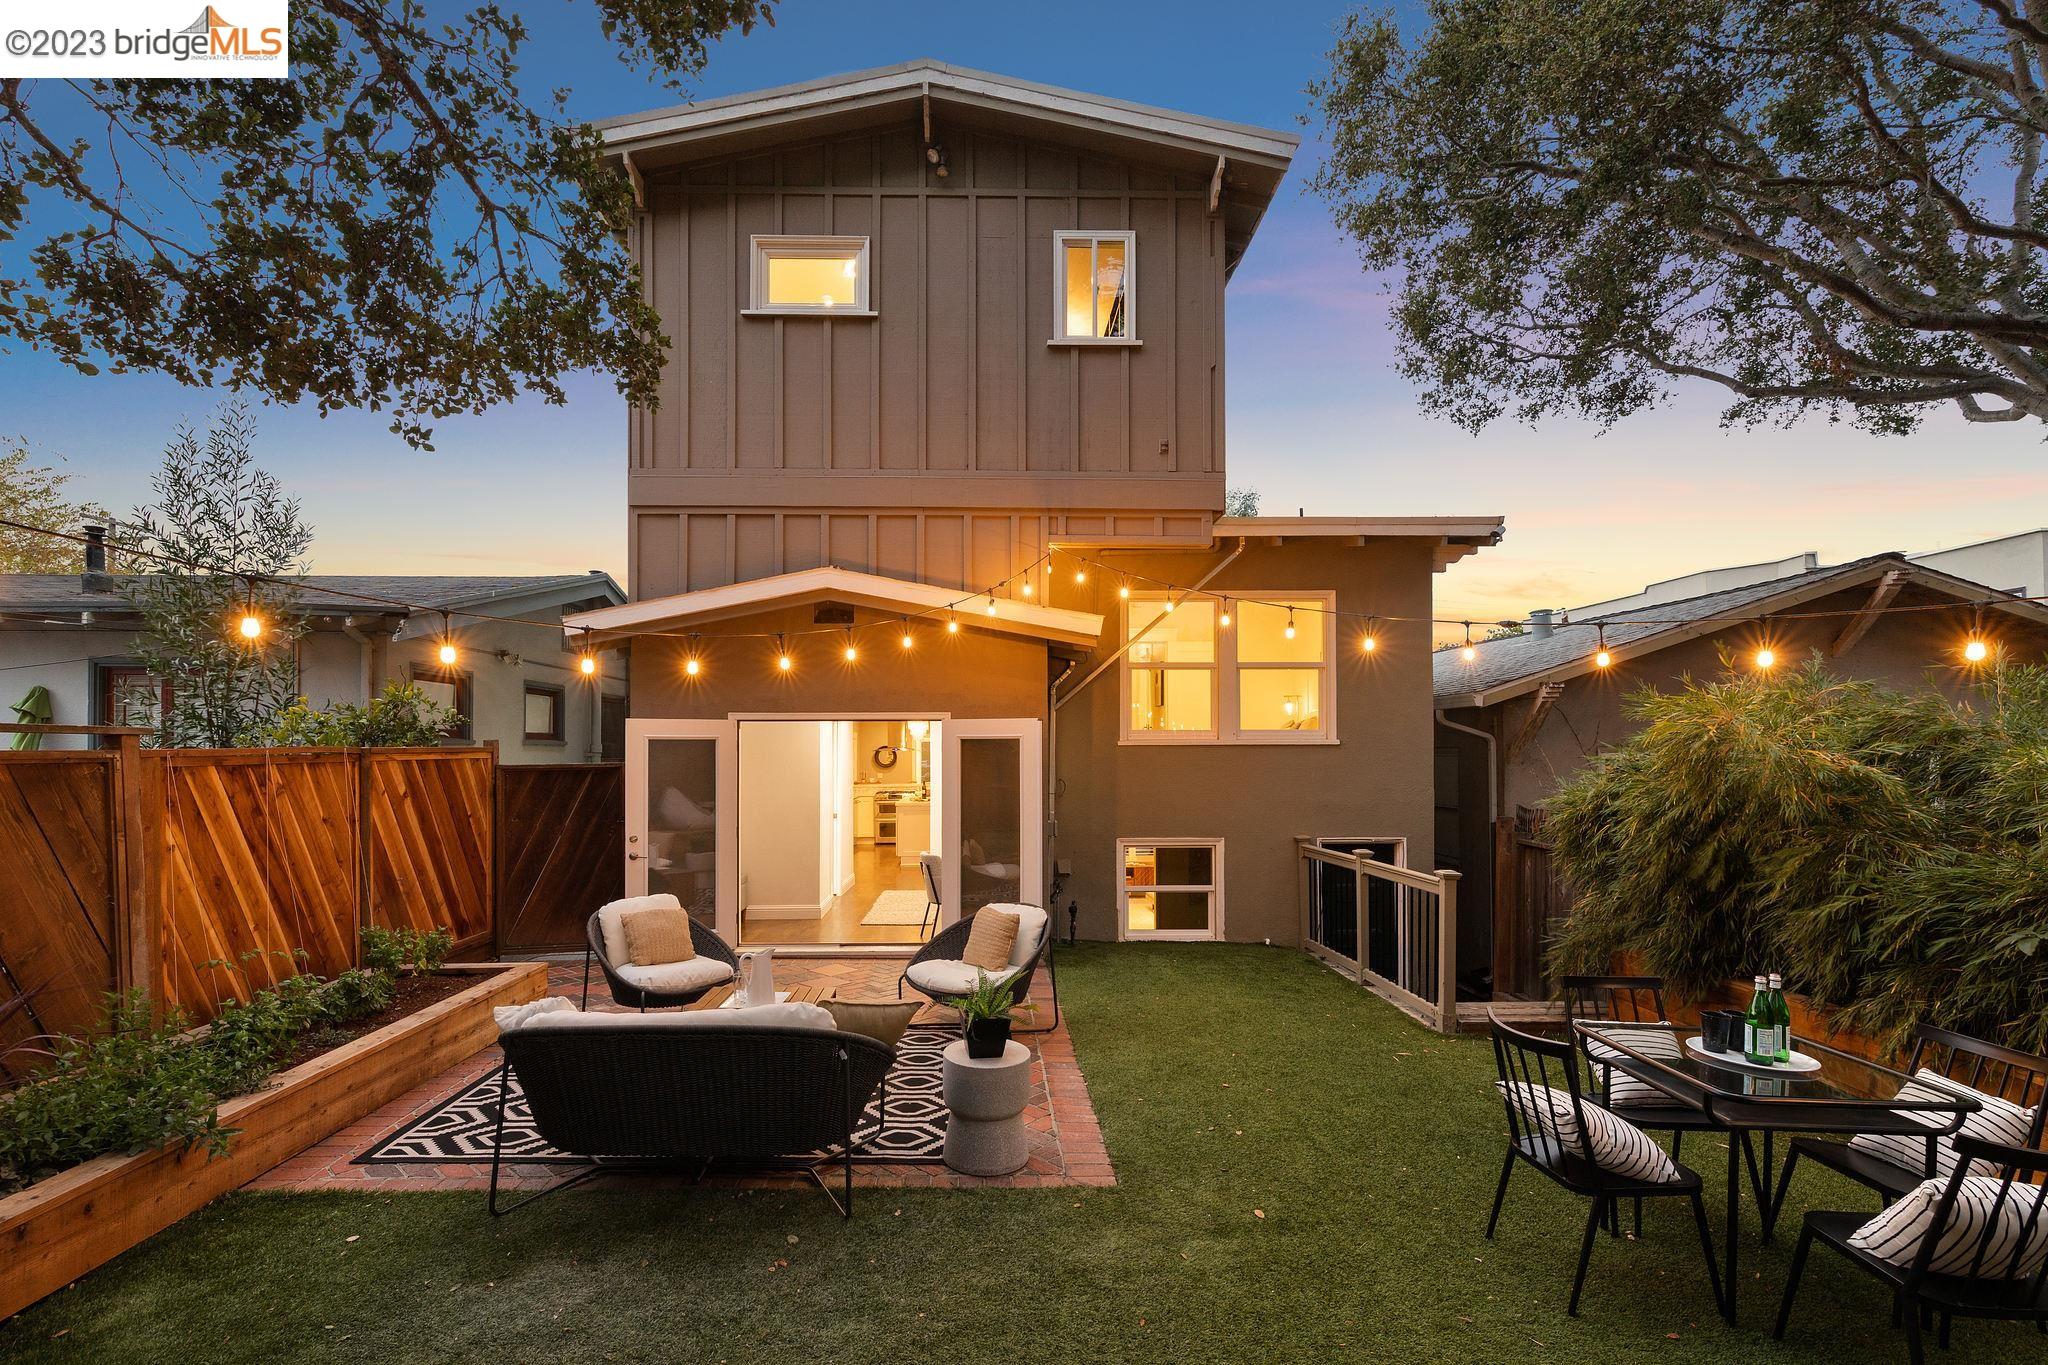 a front view of house with yard outdoor seating and entertaining space